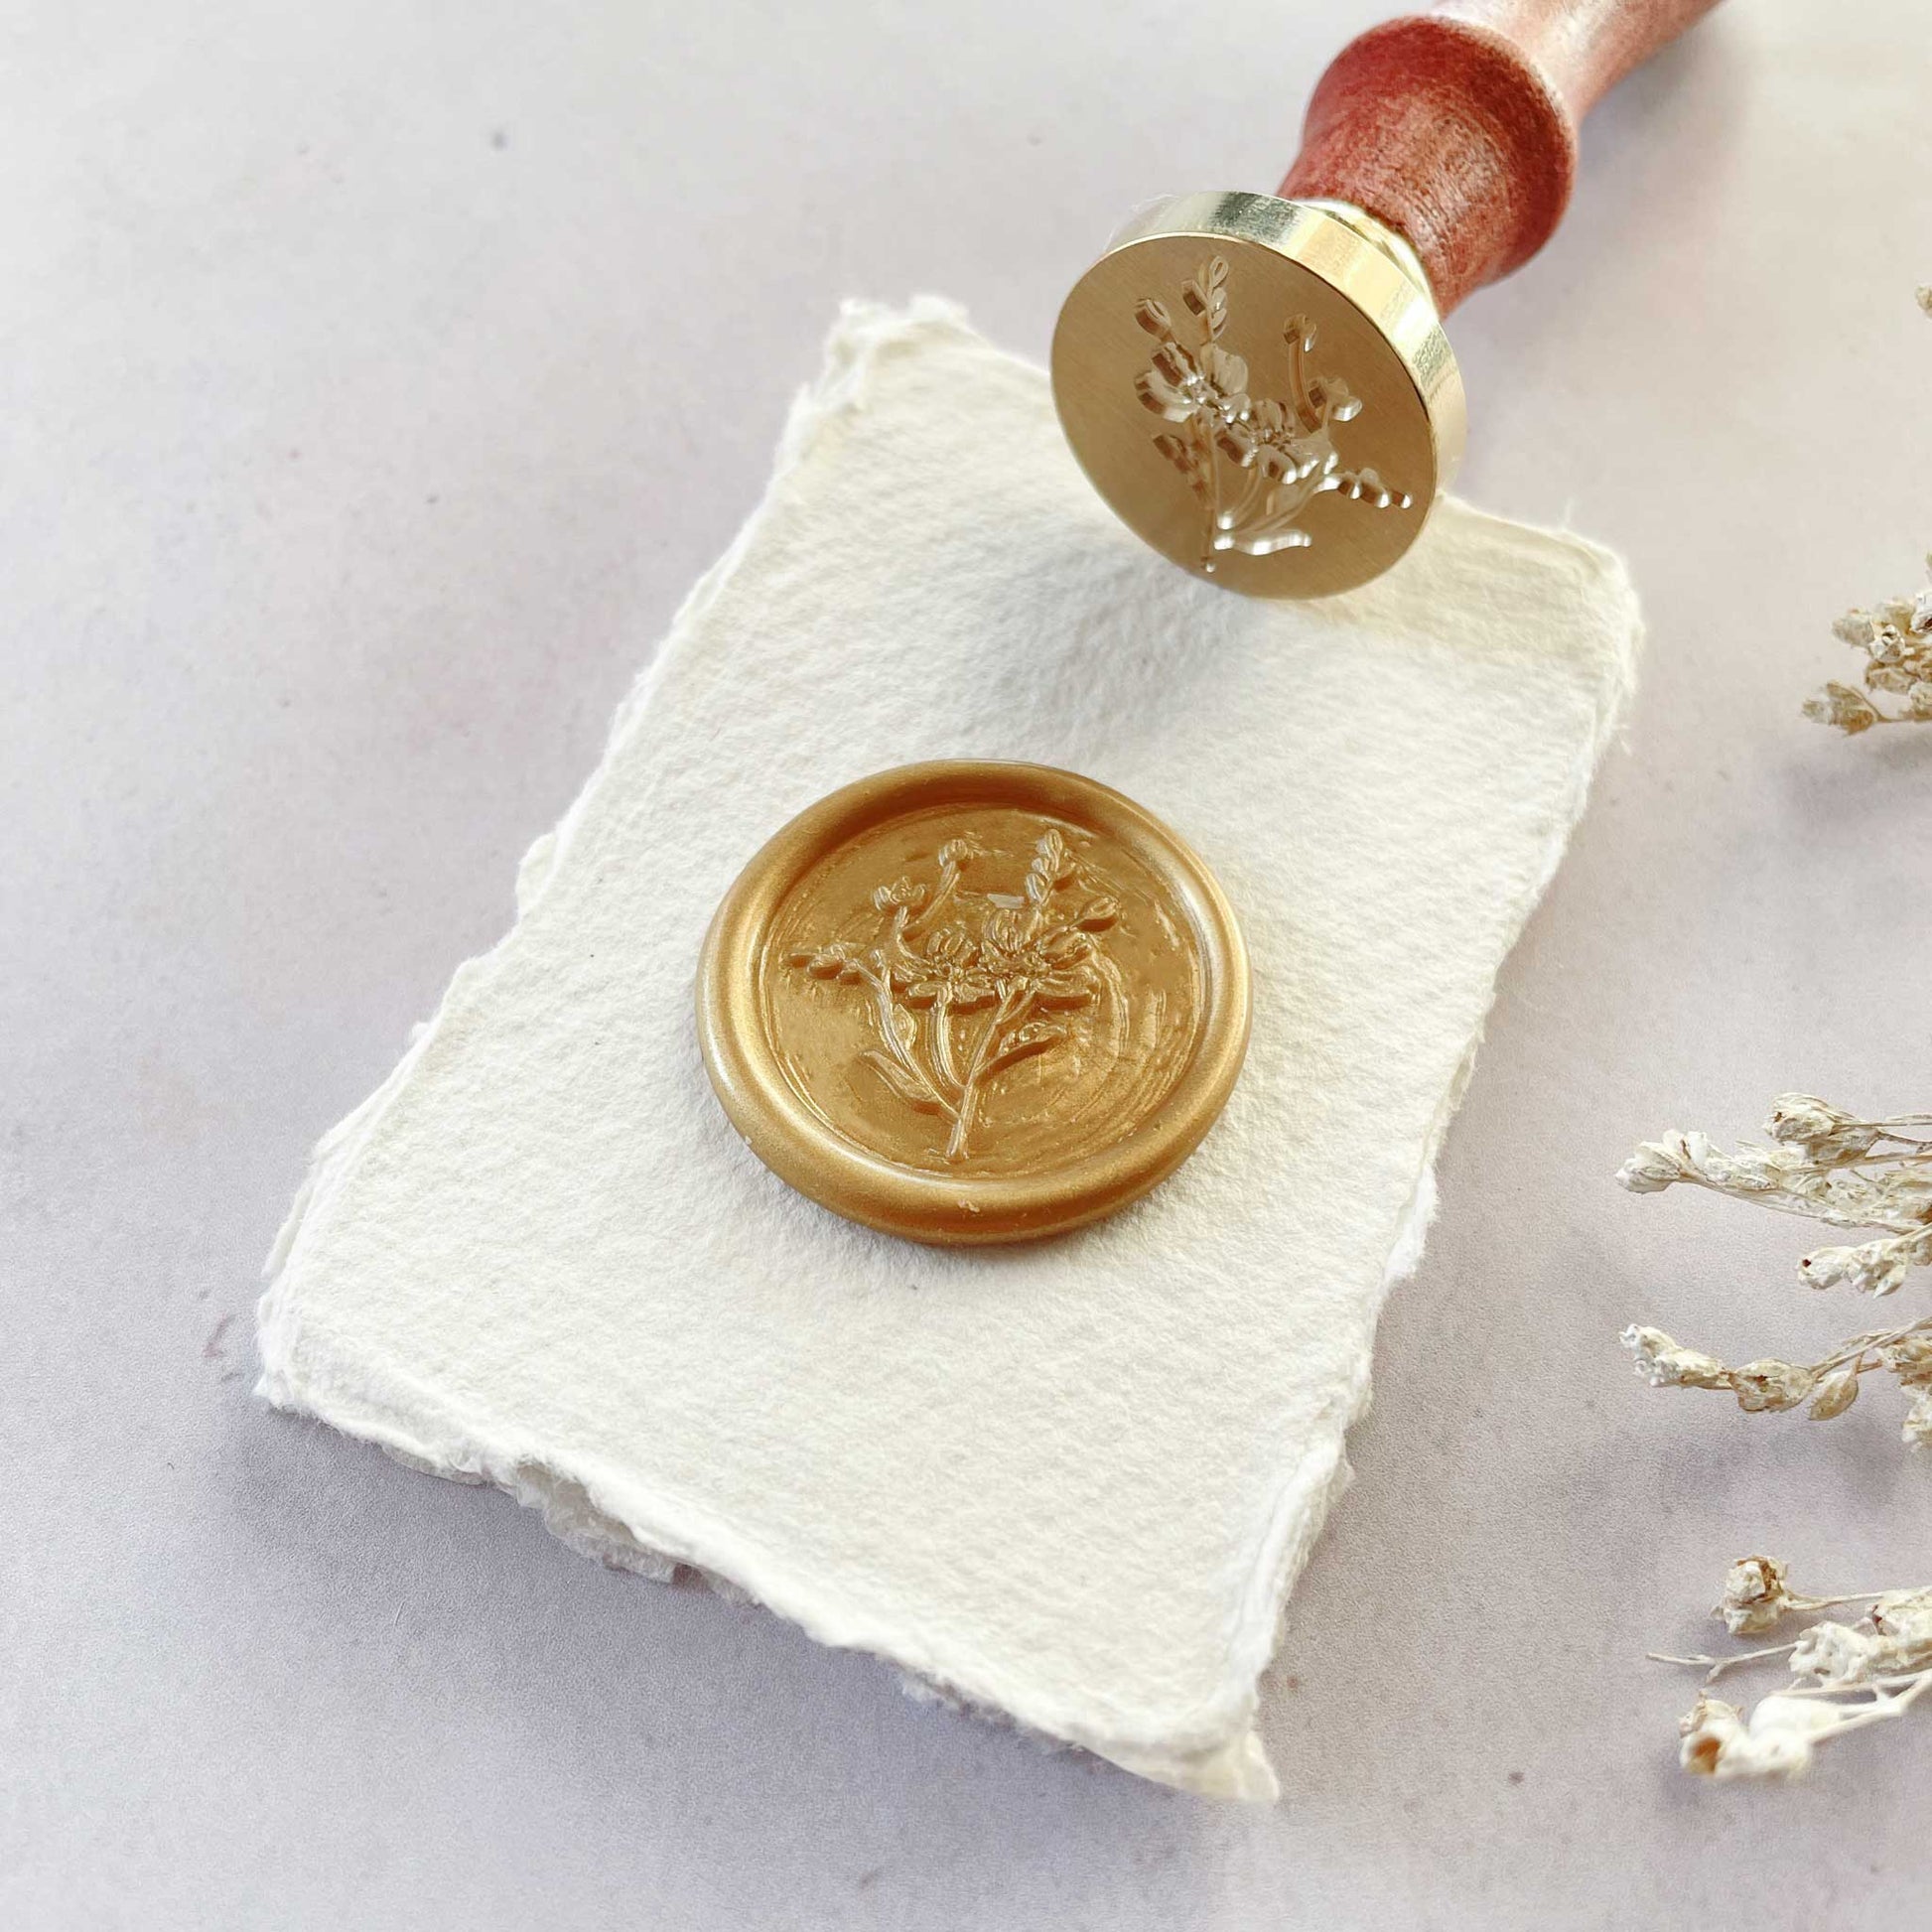 Animal & Nature Themed Wax Seal Stamps –